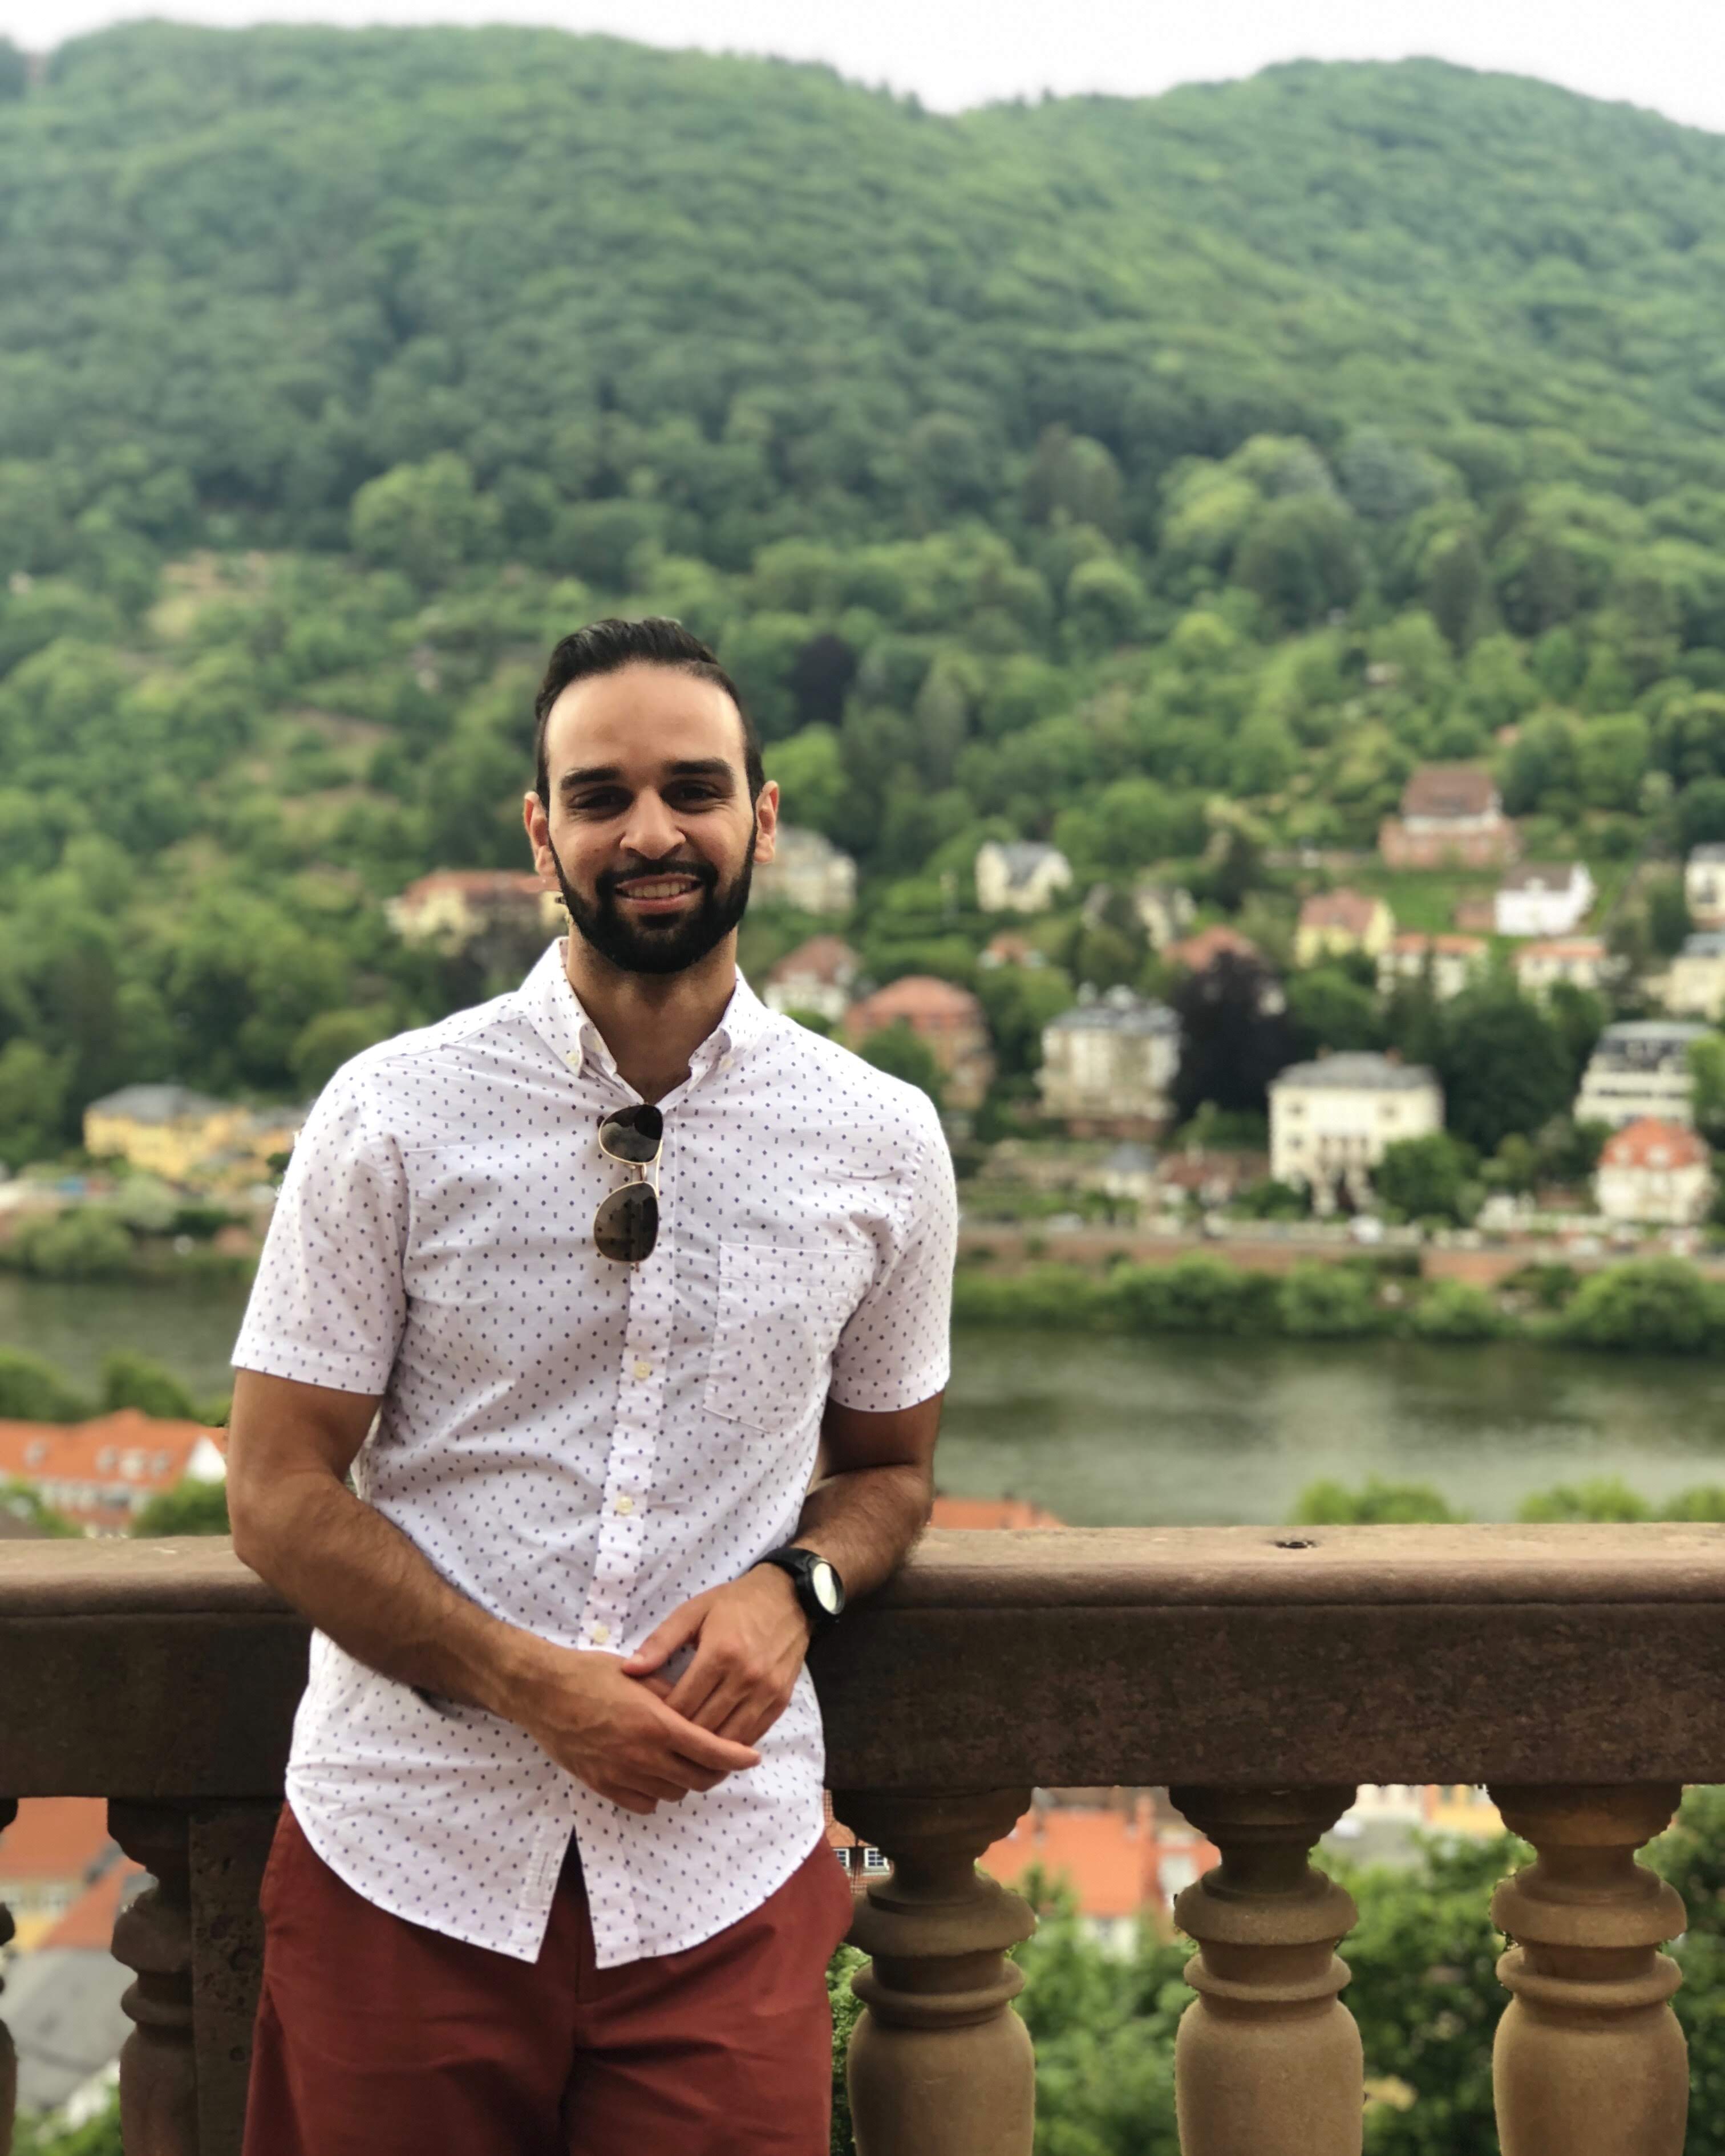 Follow this Summer 2018’s Office of Study Abroad & International Experiences Global Correspondent, Nour Khreim, on his studies in Pforzheim, Germany! Nour is a UMass Lowell Mechanical Engineering major studying this summer on a UMass Lowell Exchange study abroad program, Engineers Made in Germany (EMIG).